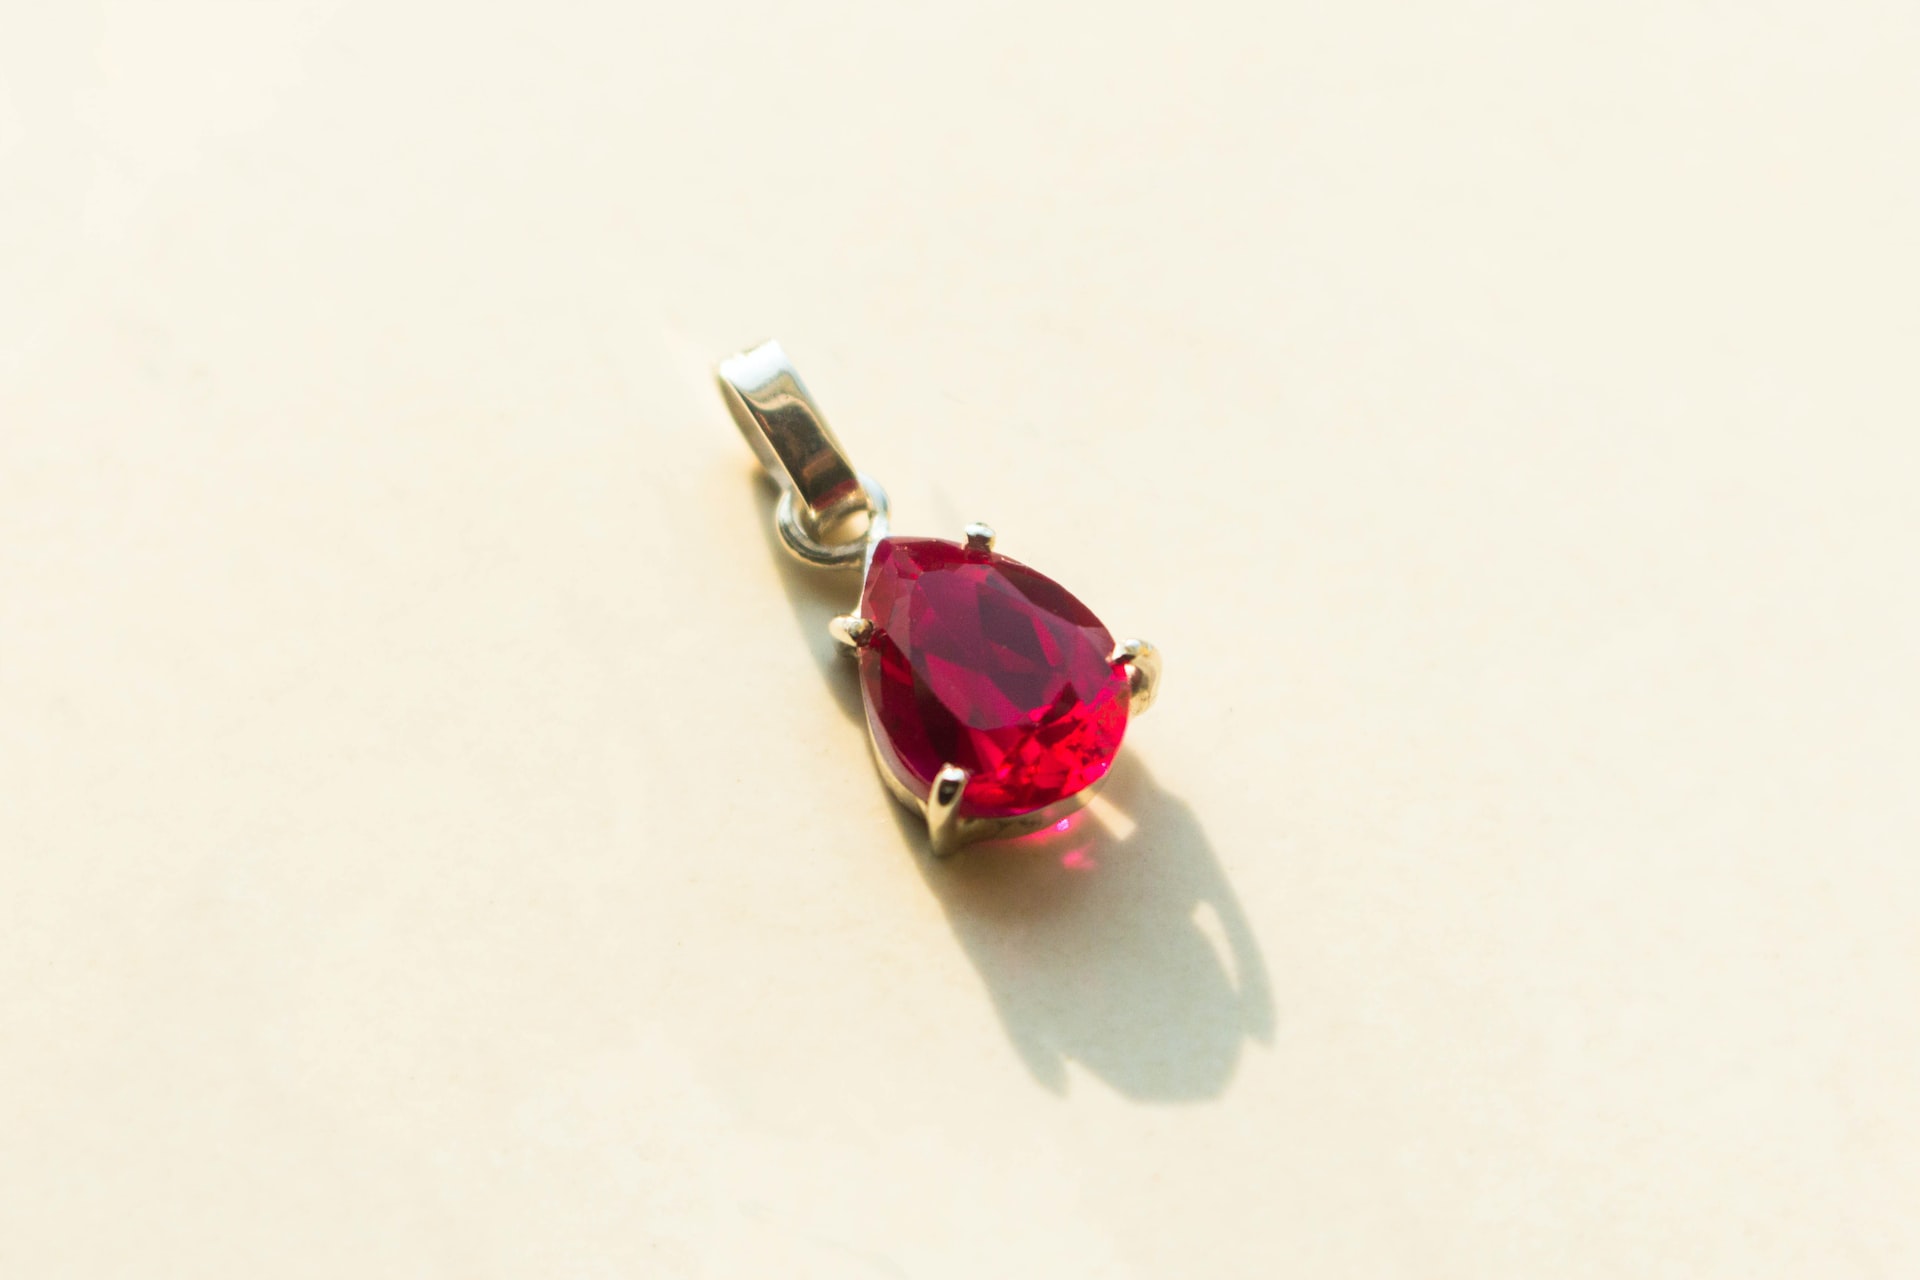 July Gemstones - Ruby Is The Color Of Love And Passion